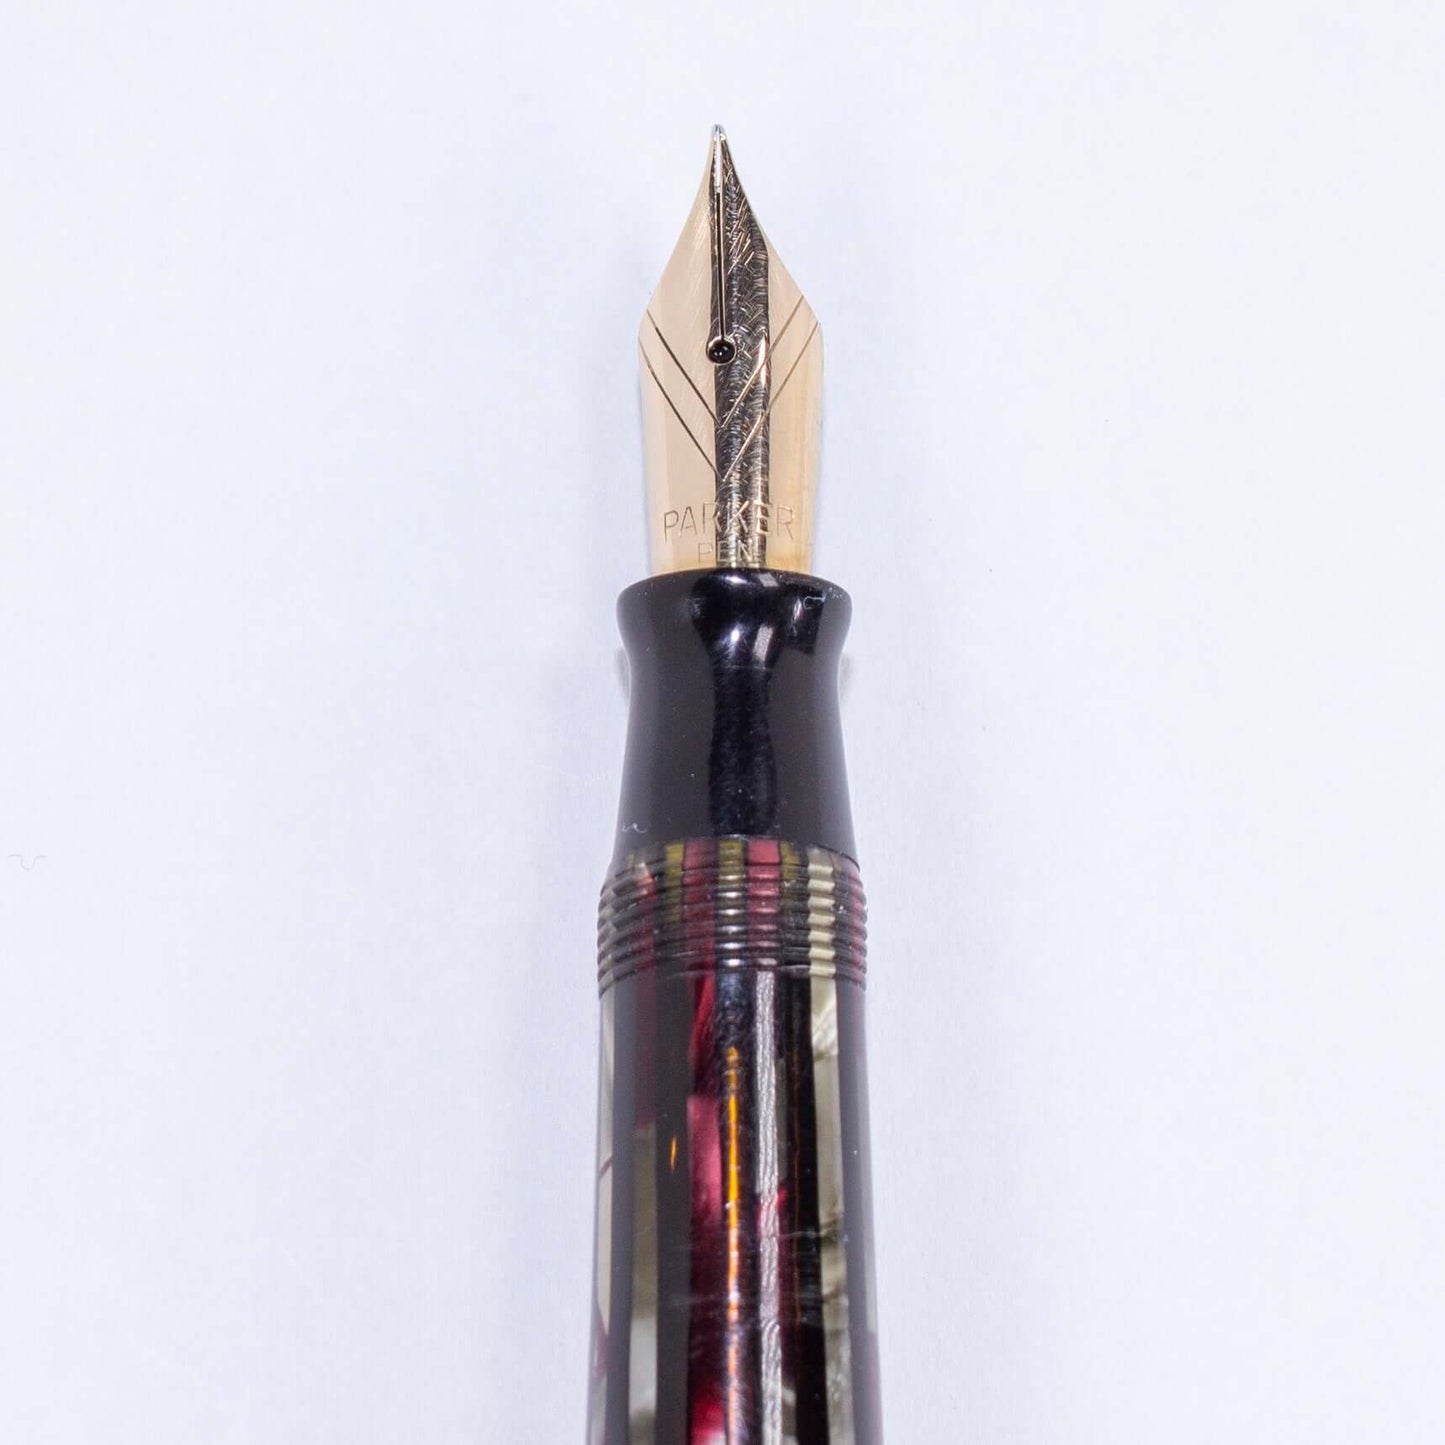 Parker Striped Duofold- Duovac, 14K "V" Nib, Dusty Red, Restored Vintage Fountain PenName/Type: Parker Duovac Manufacture Year: 1945 Length: 5 1/4 Filling System: Restored Vacumatic with plastic filler Color/Pattern: Dusty Red Nib Type/Condition and remar